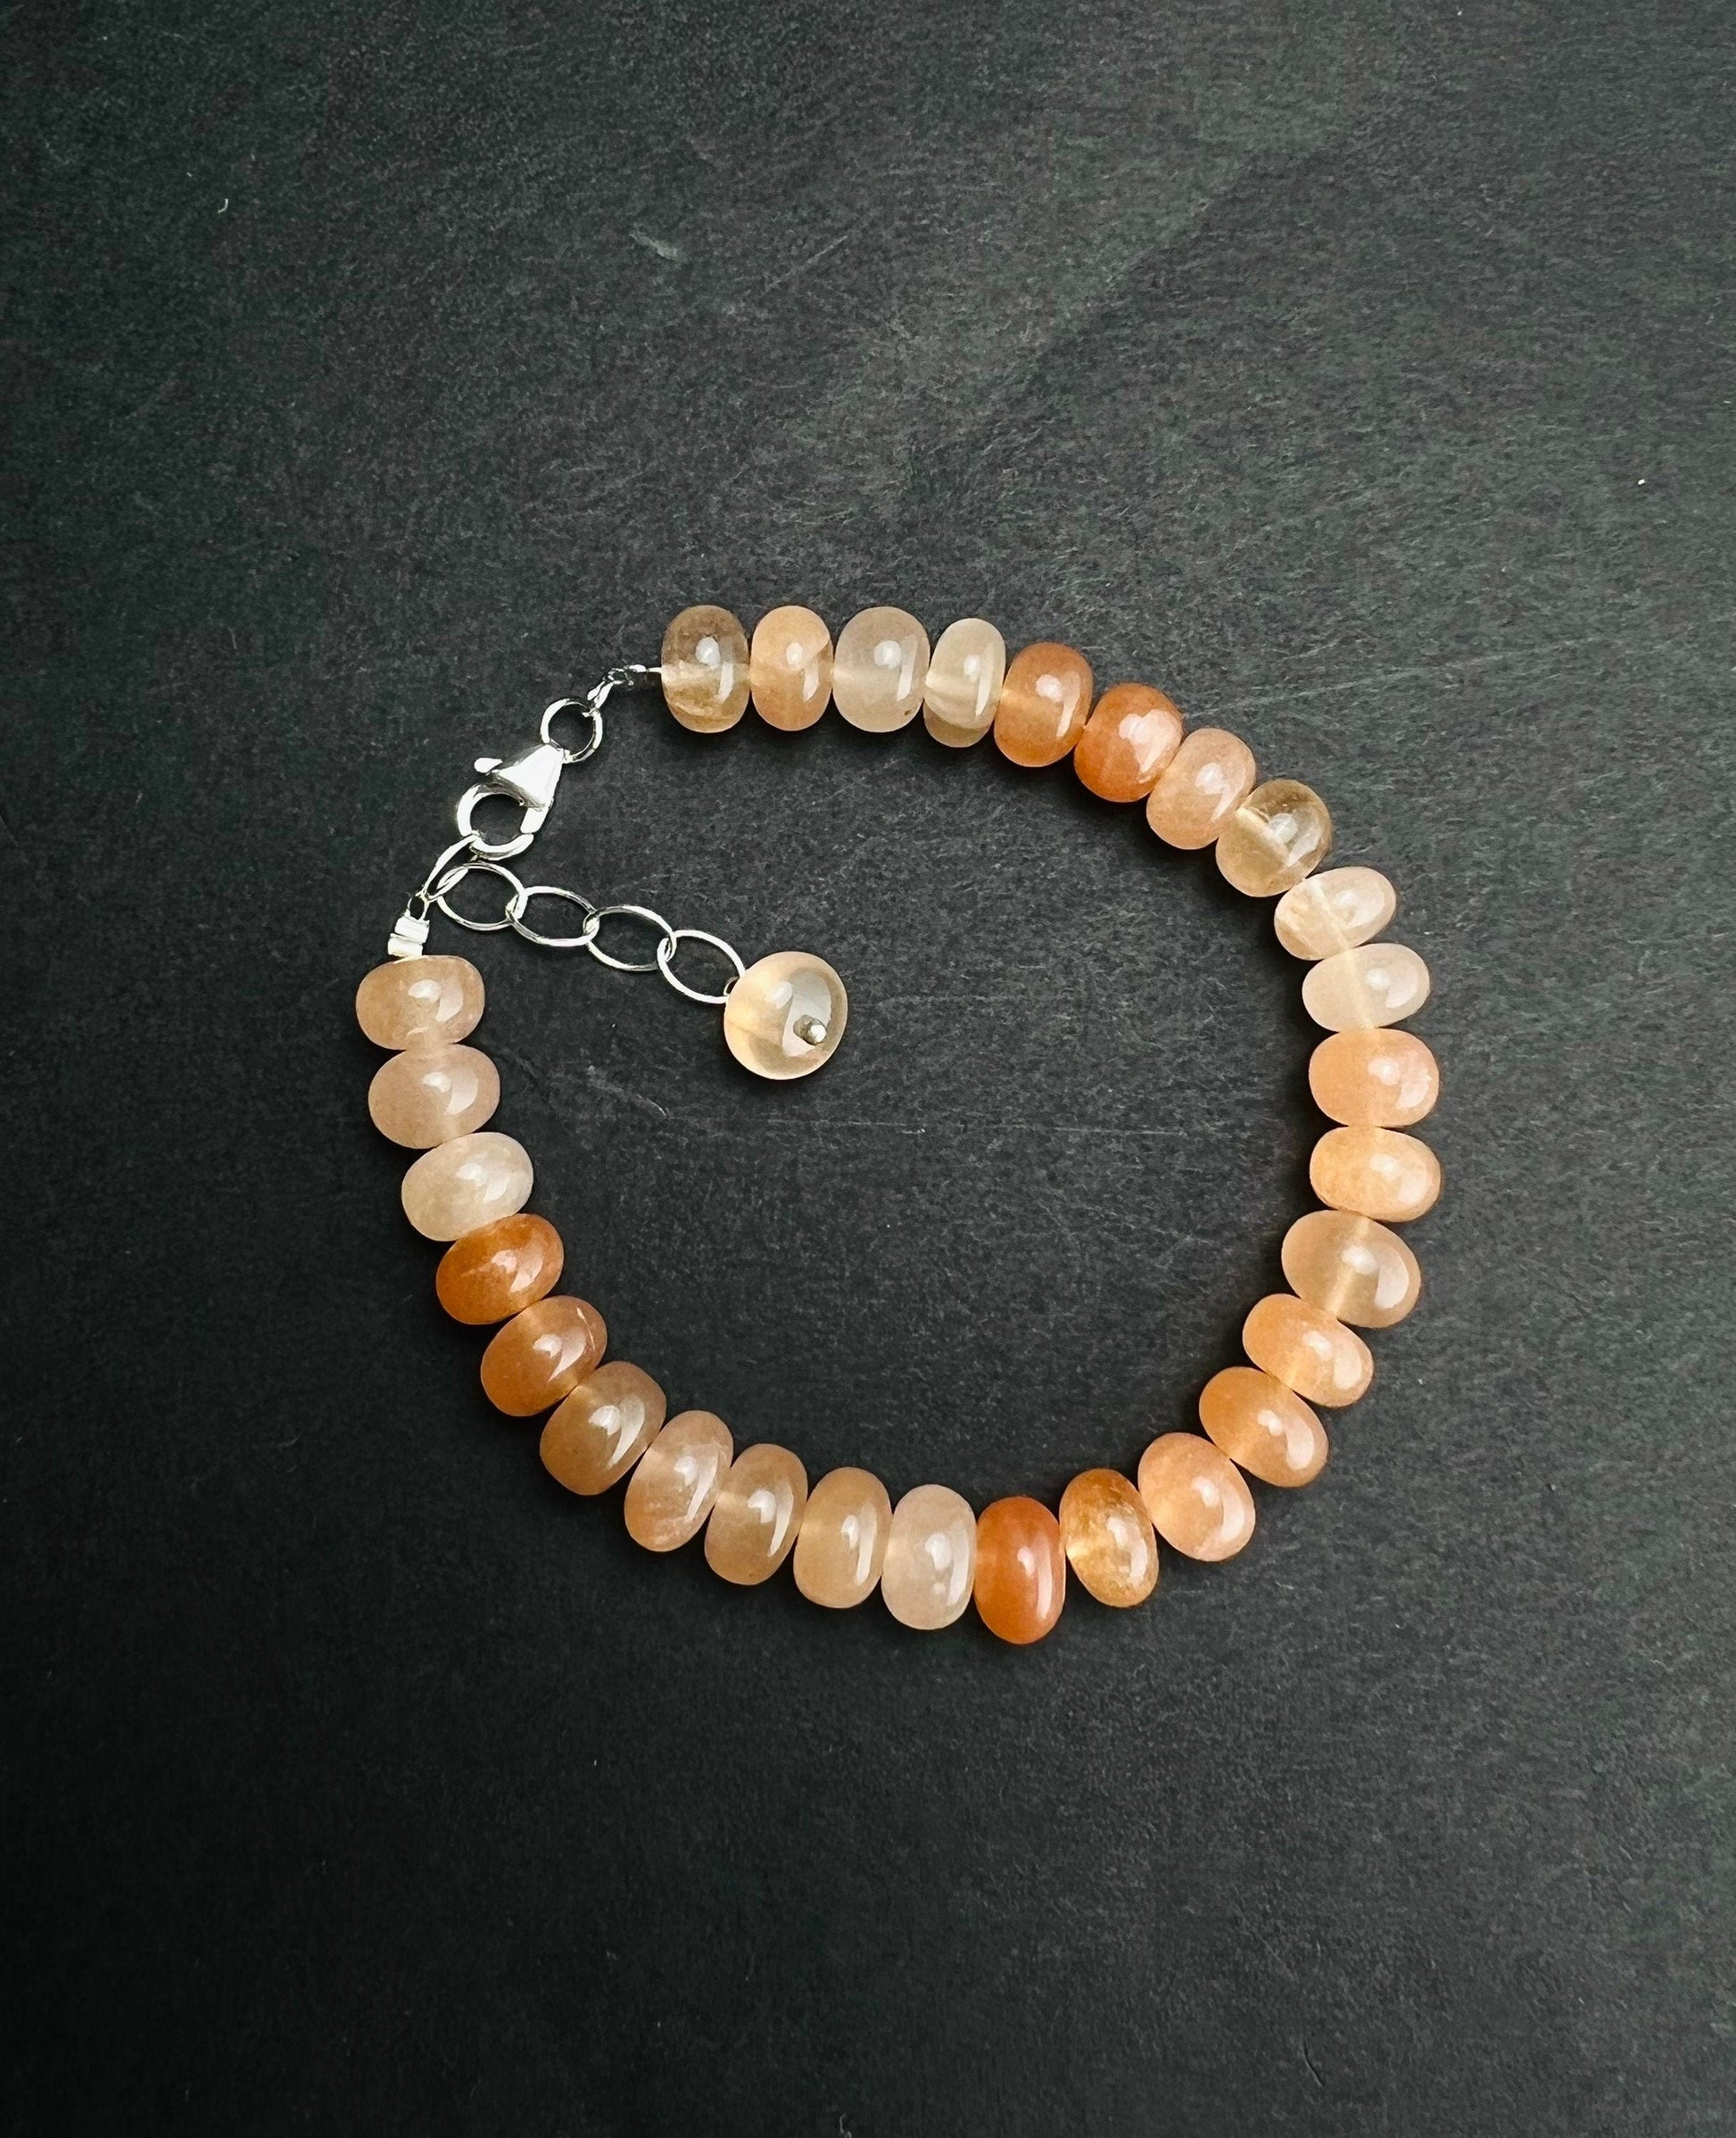 Natural Peach Moonstone 2 tone smooth roundel 8-8.5mm large multi peachy pink with 925 sterling silver Bracelet with 1” extension